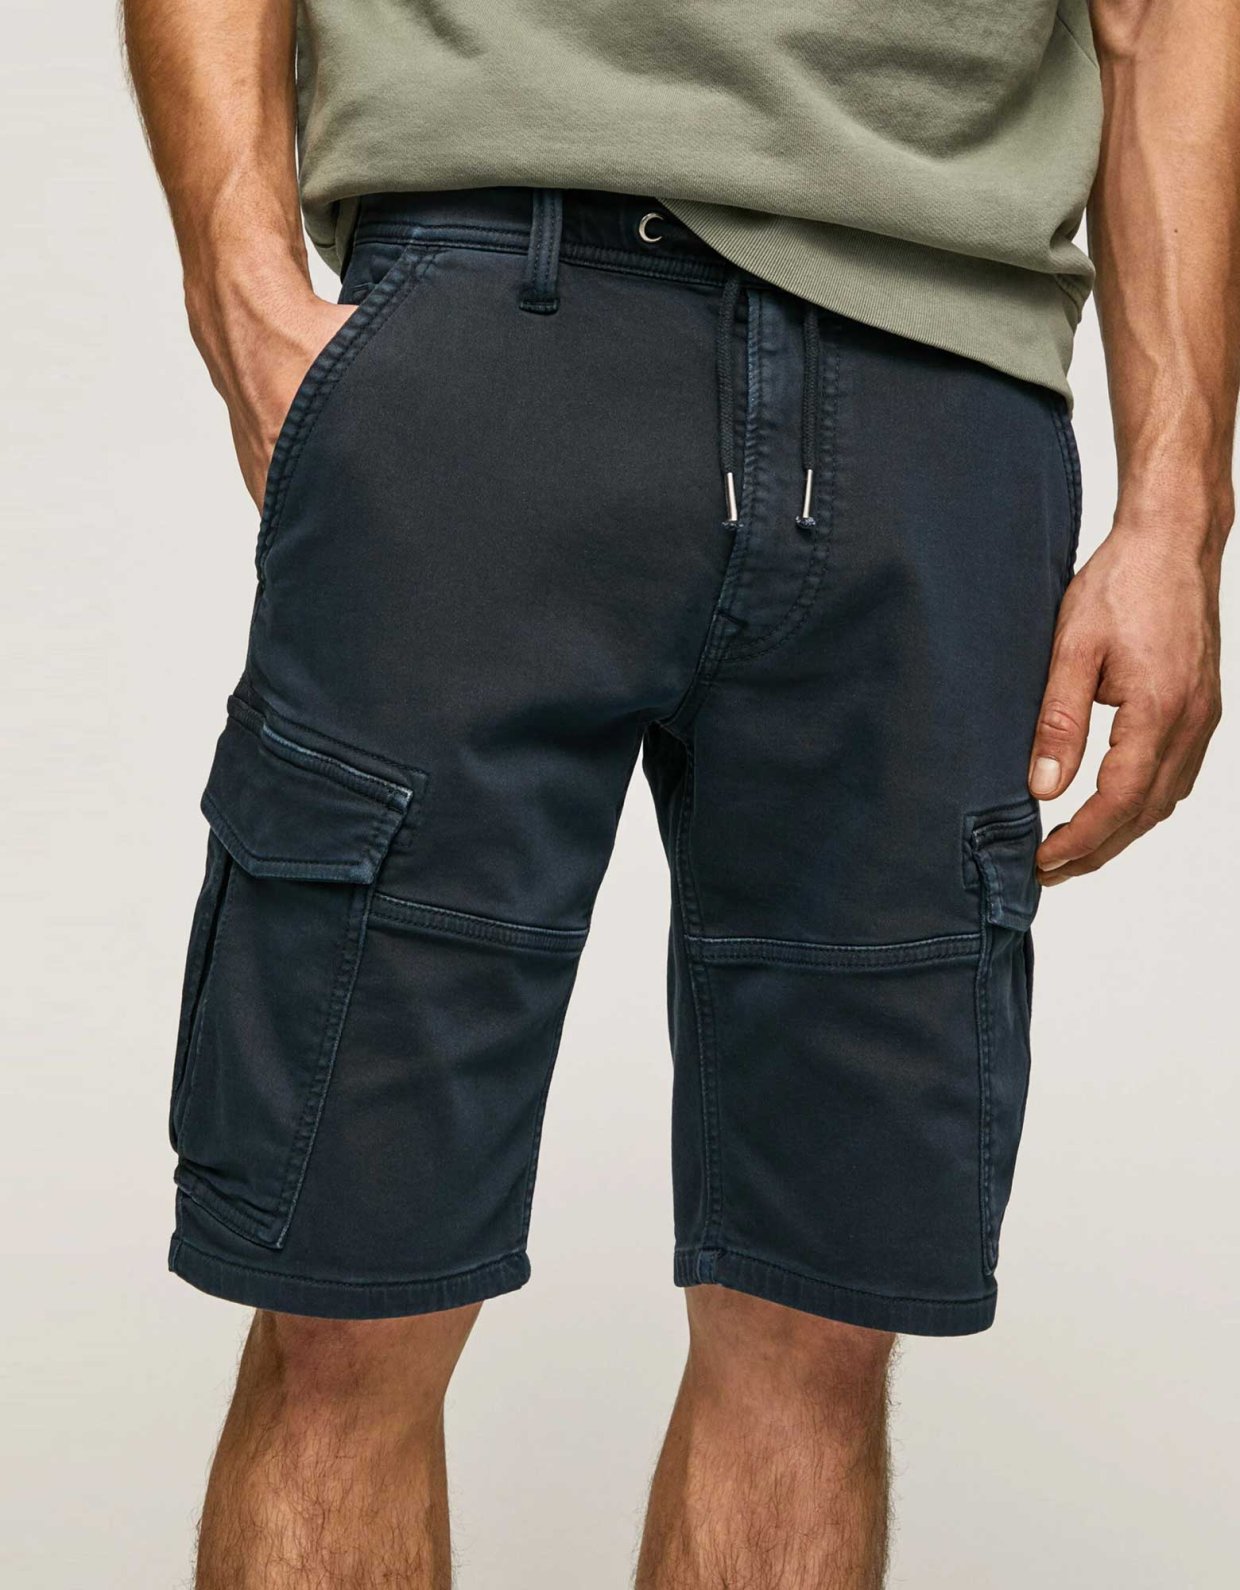 Pepe Jeans Jared shorts dulwich